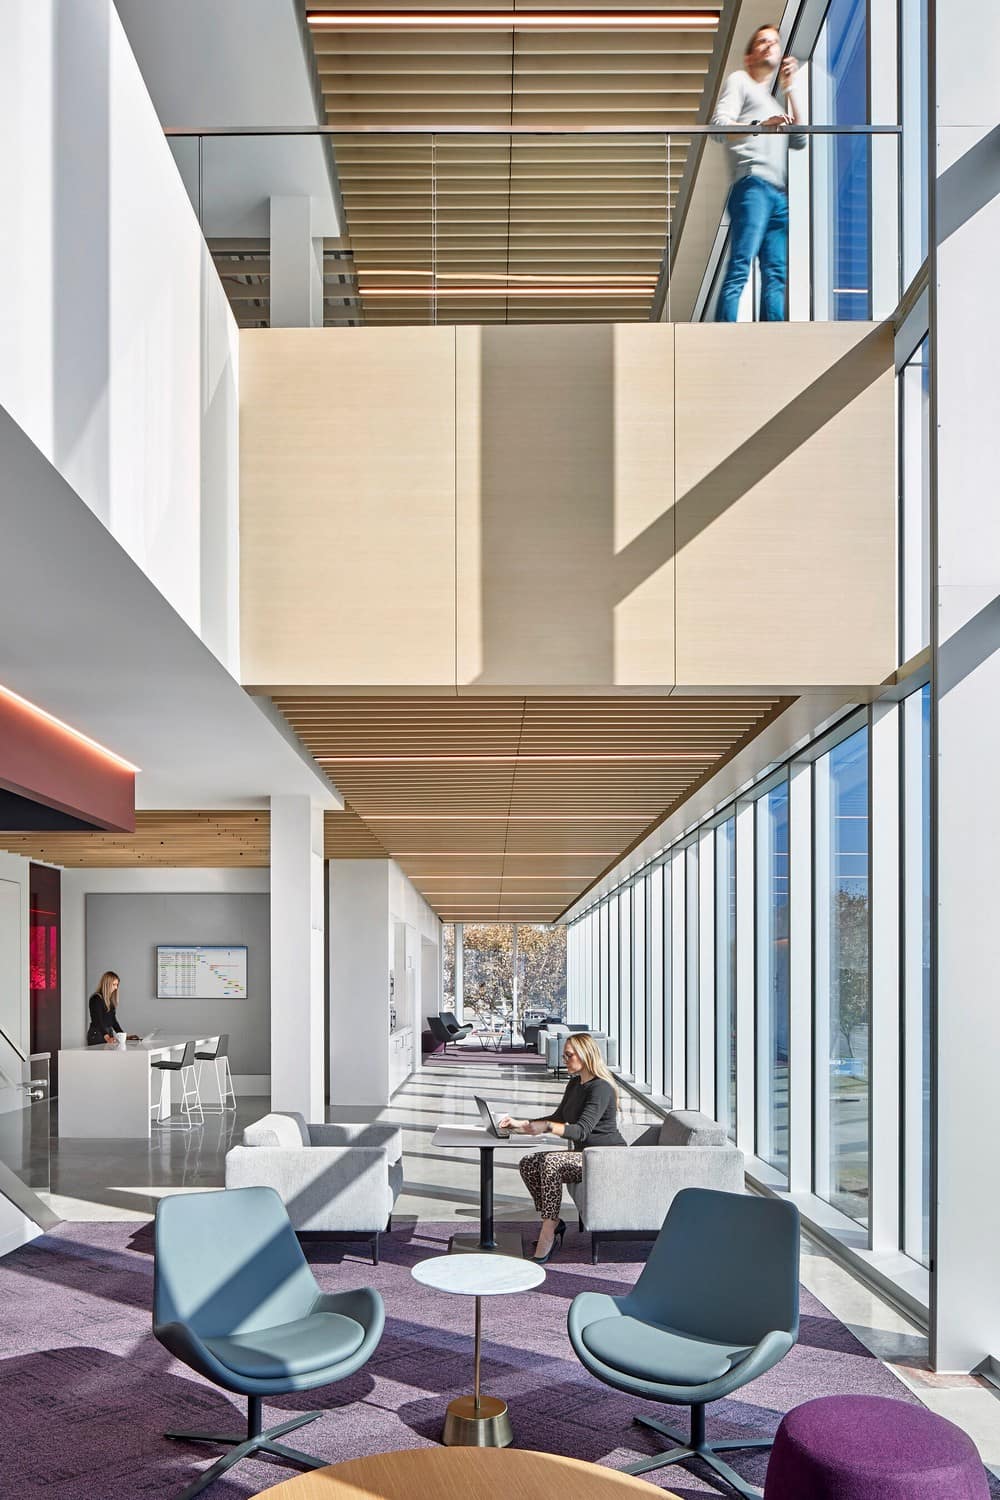 Workplace Environment Designed to Drive Research and Discovery